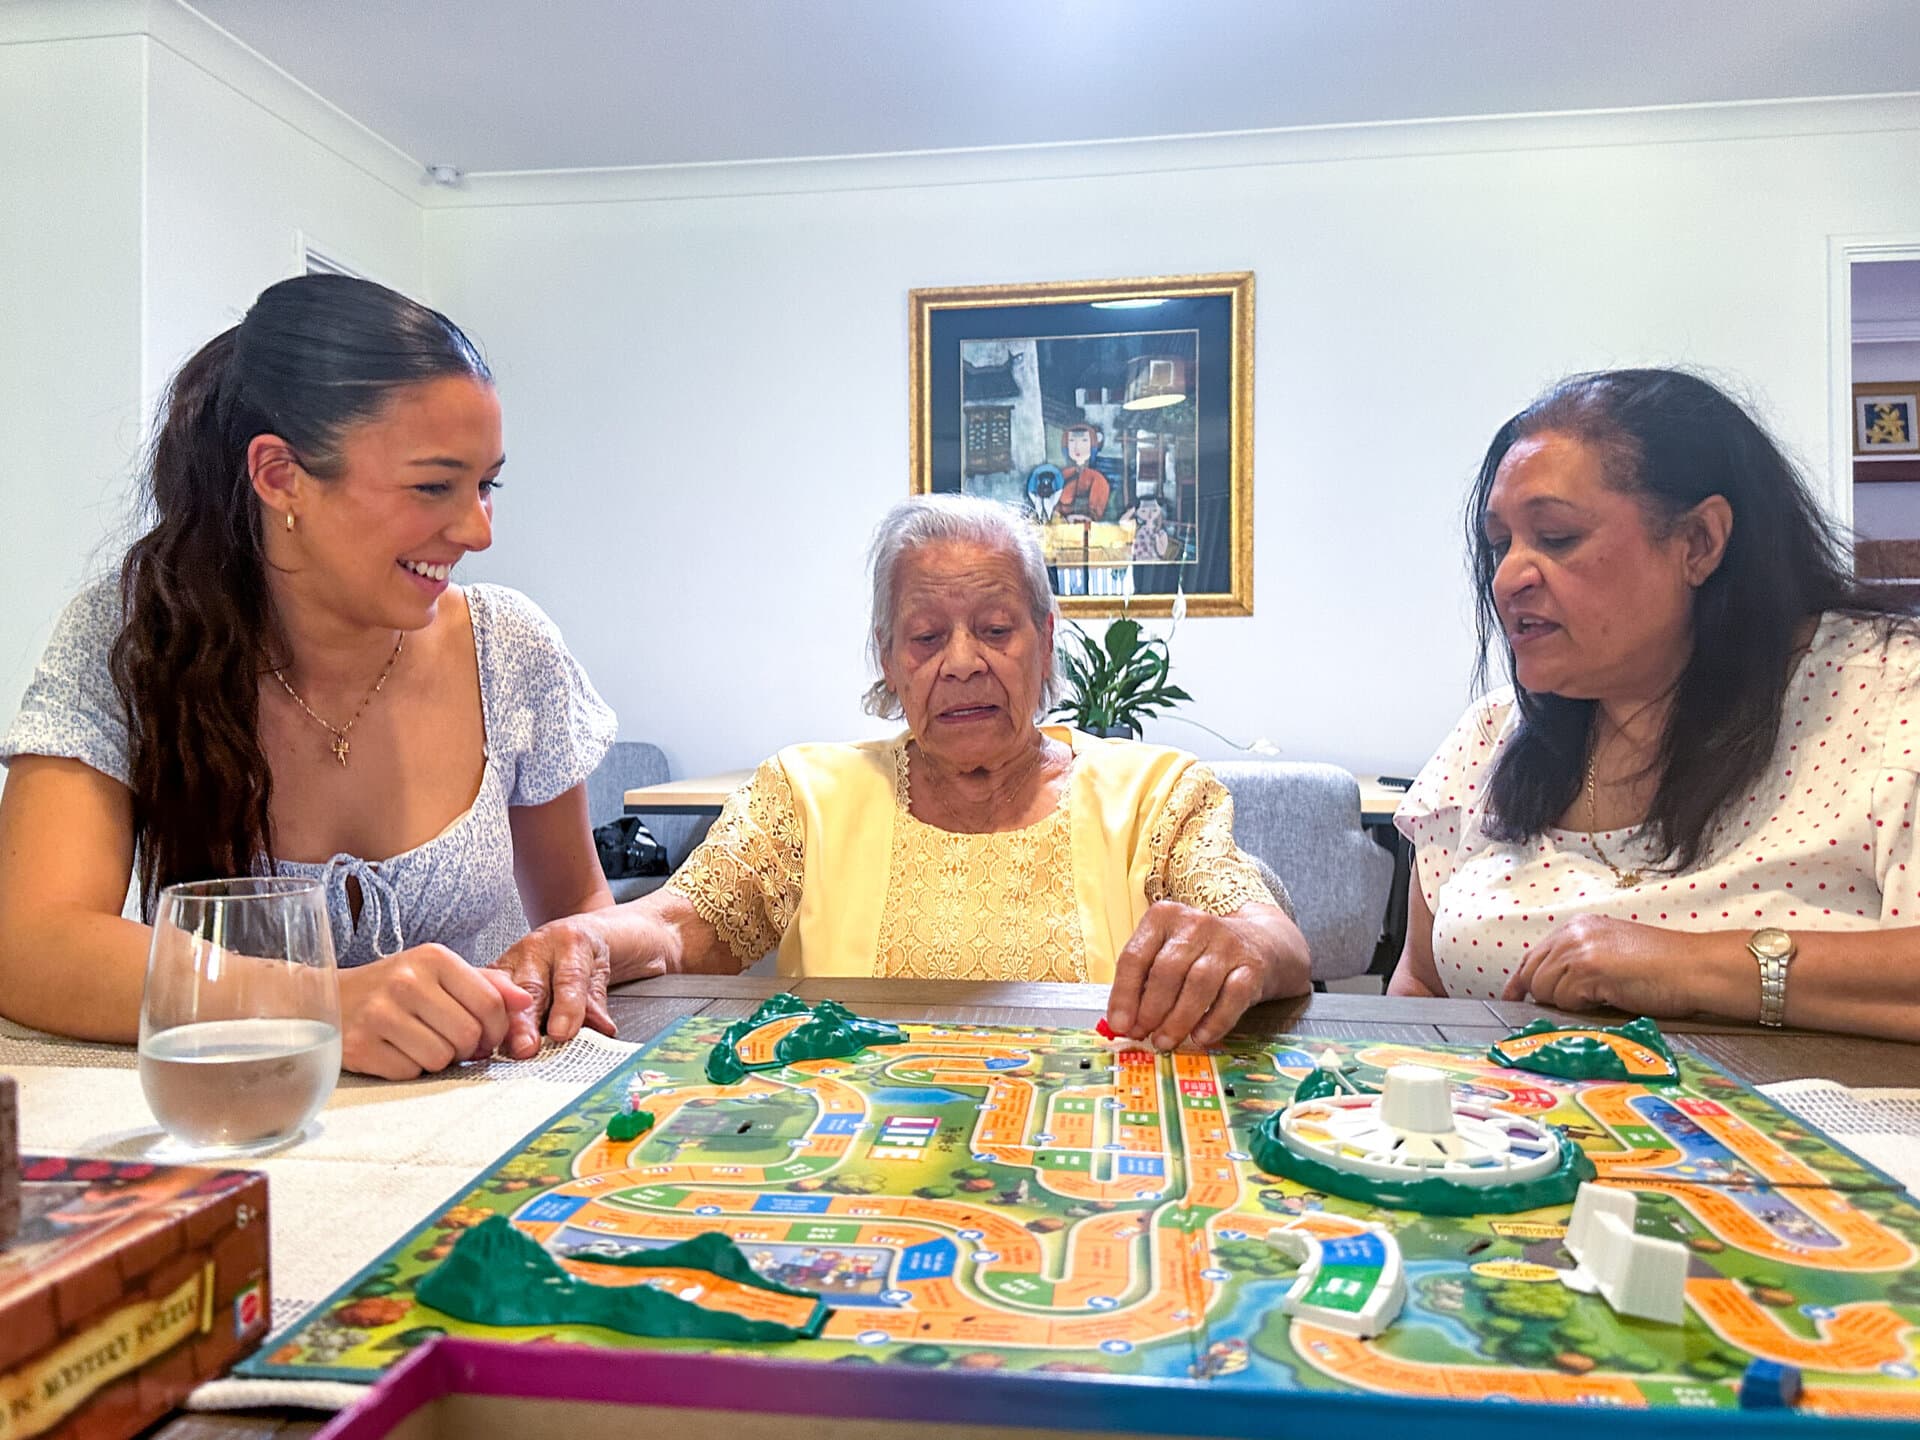 Three women play a board game at a table.